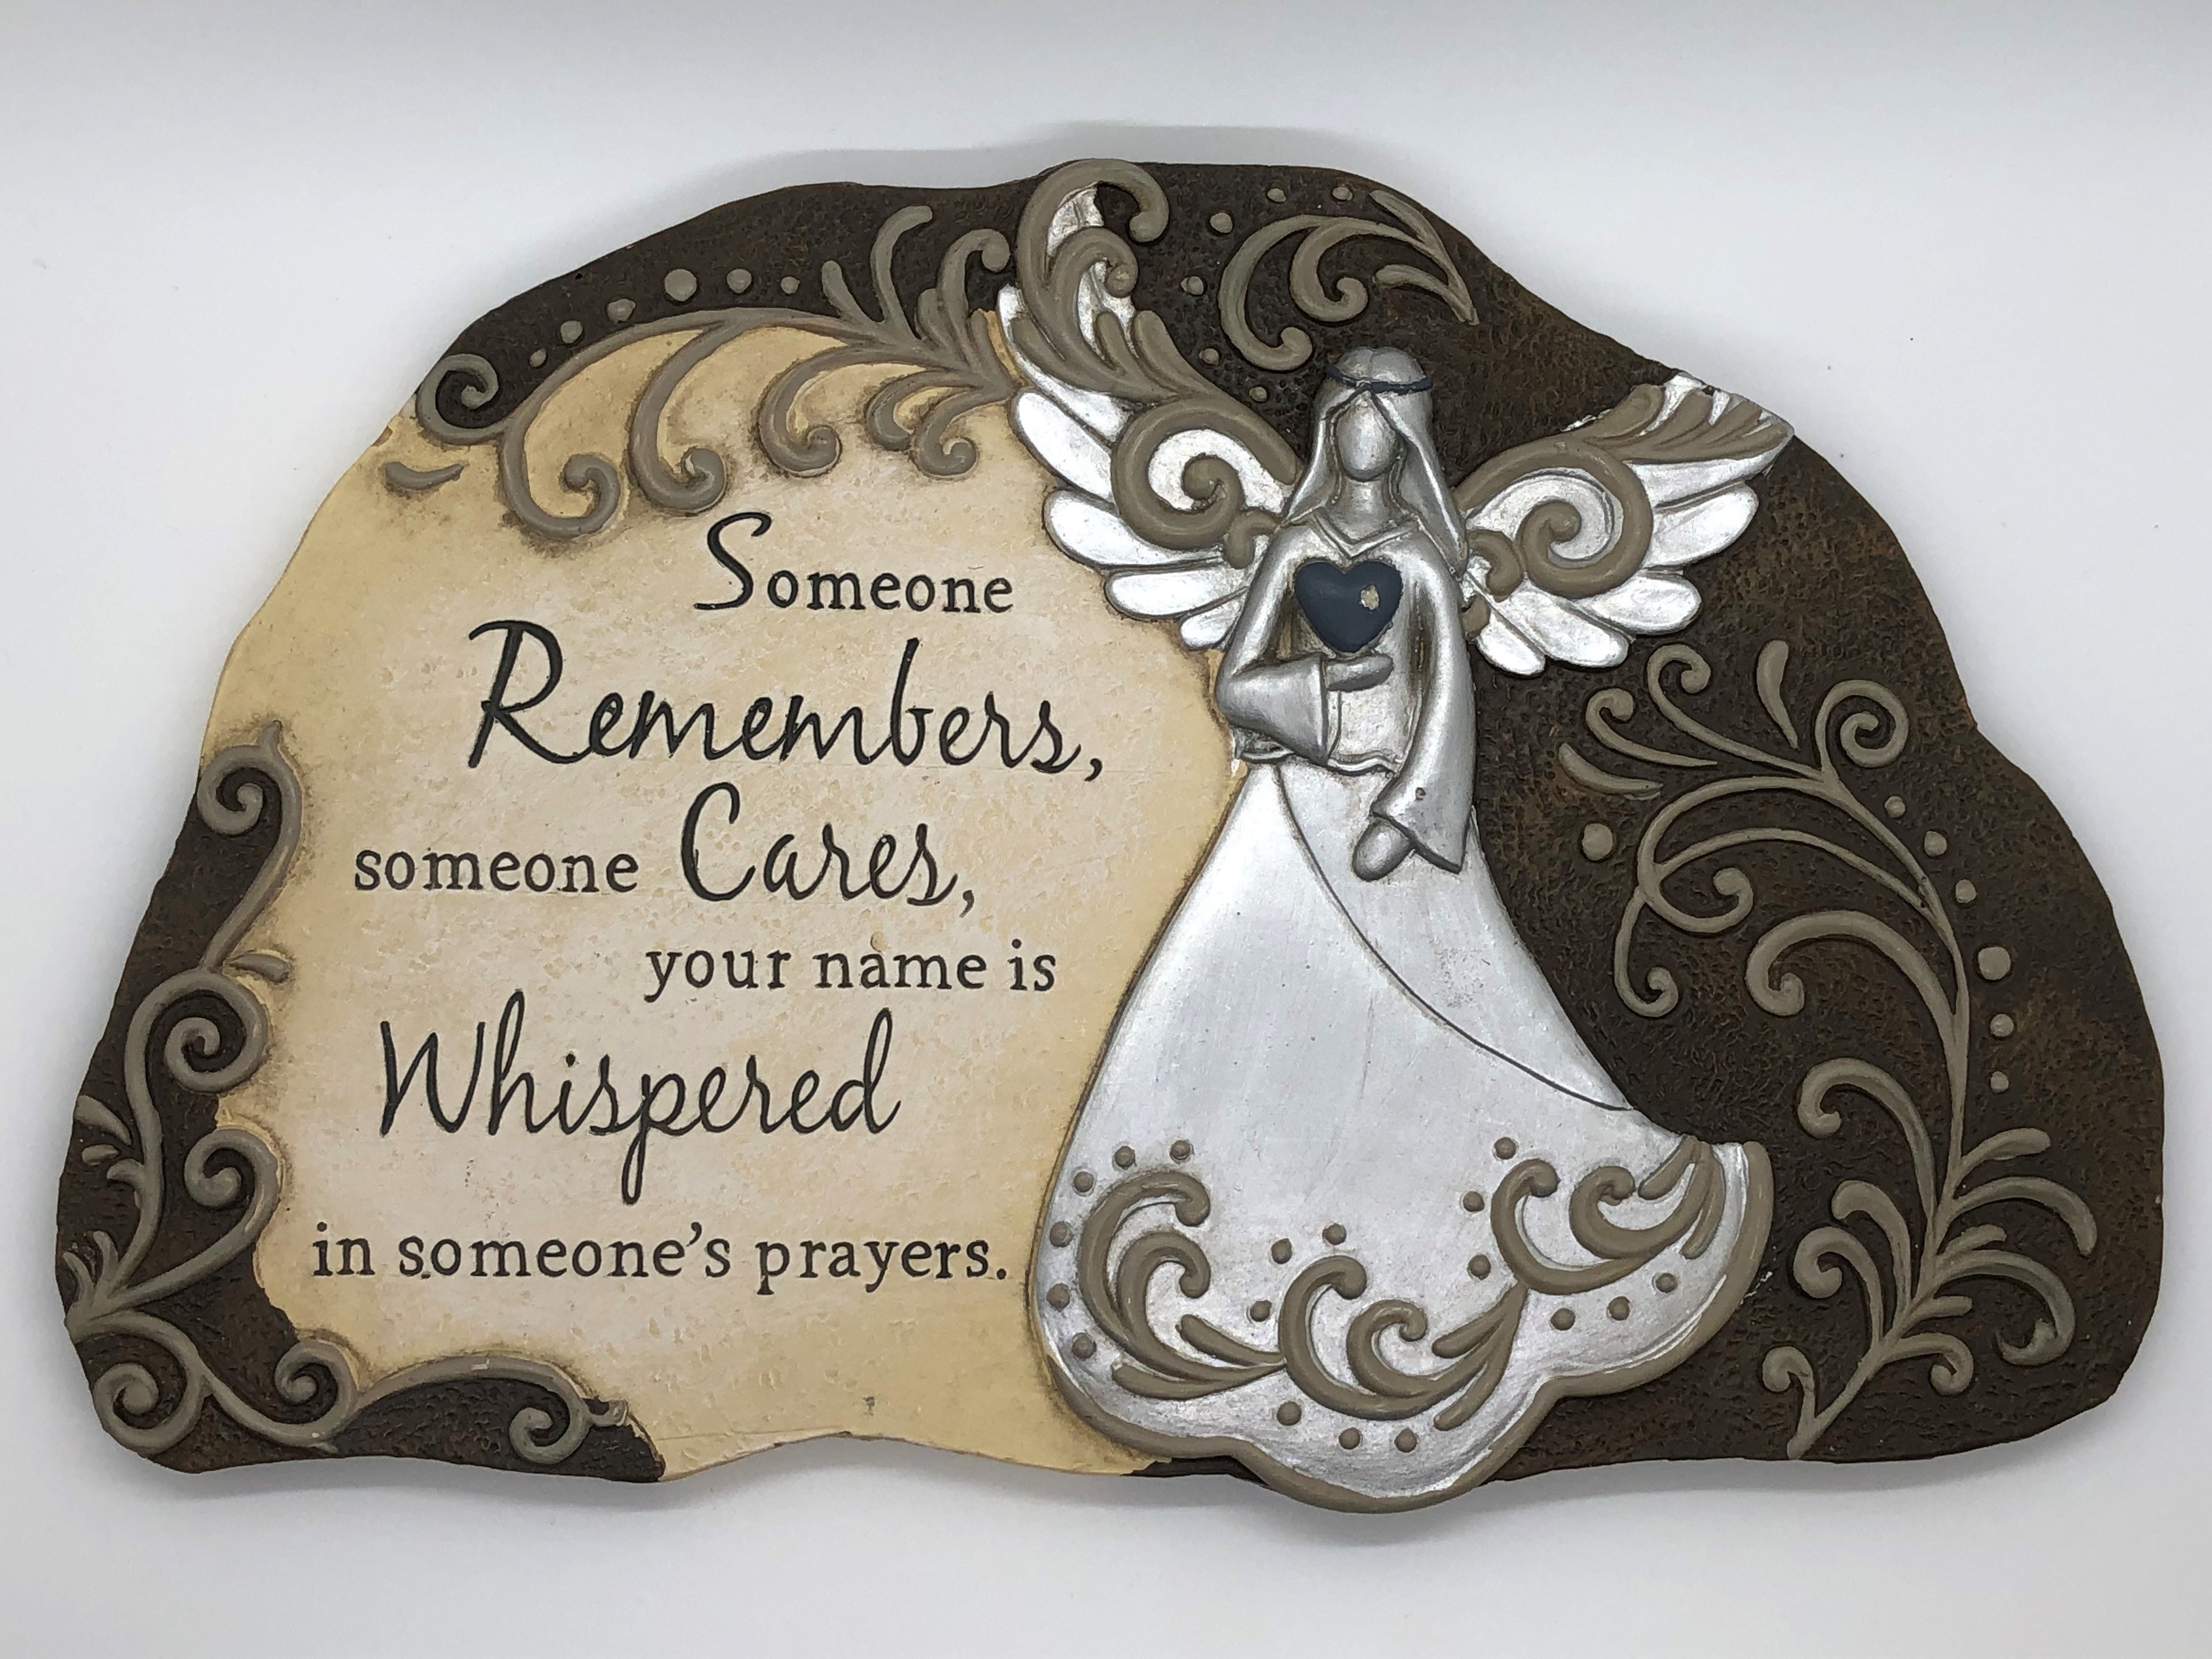 Garden Plaque Stepping Stones ~Someone remembers, someone Cares, your name is Whispered in someone's prayers